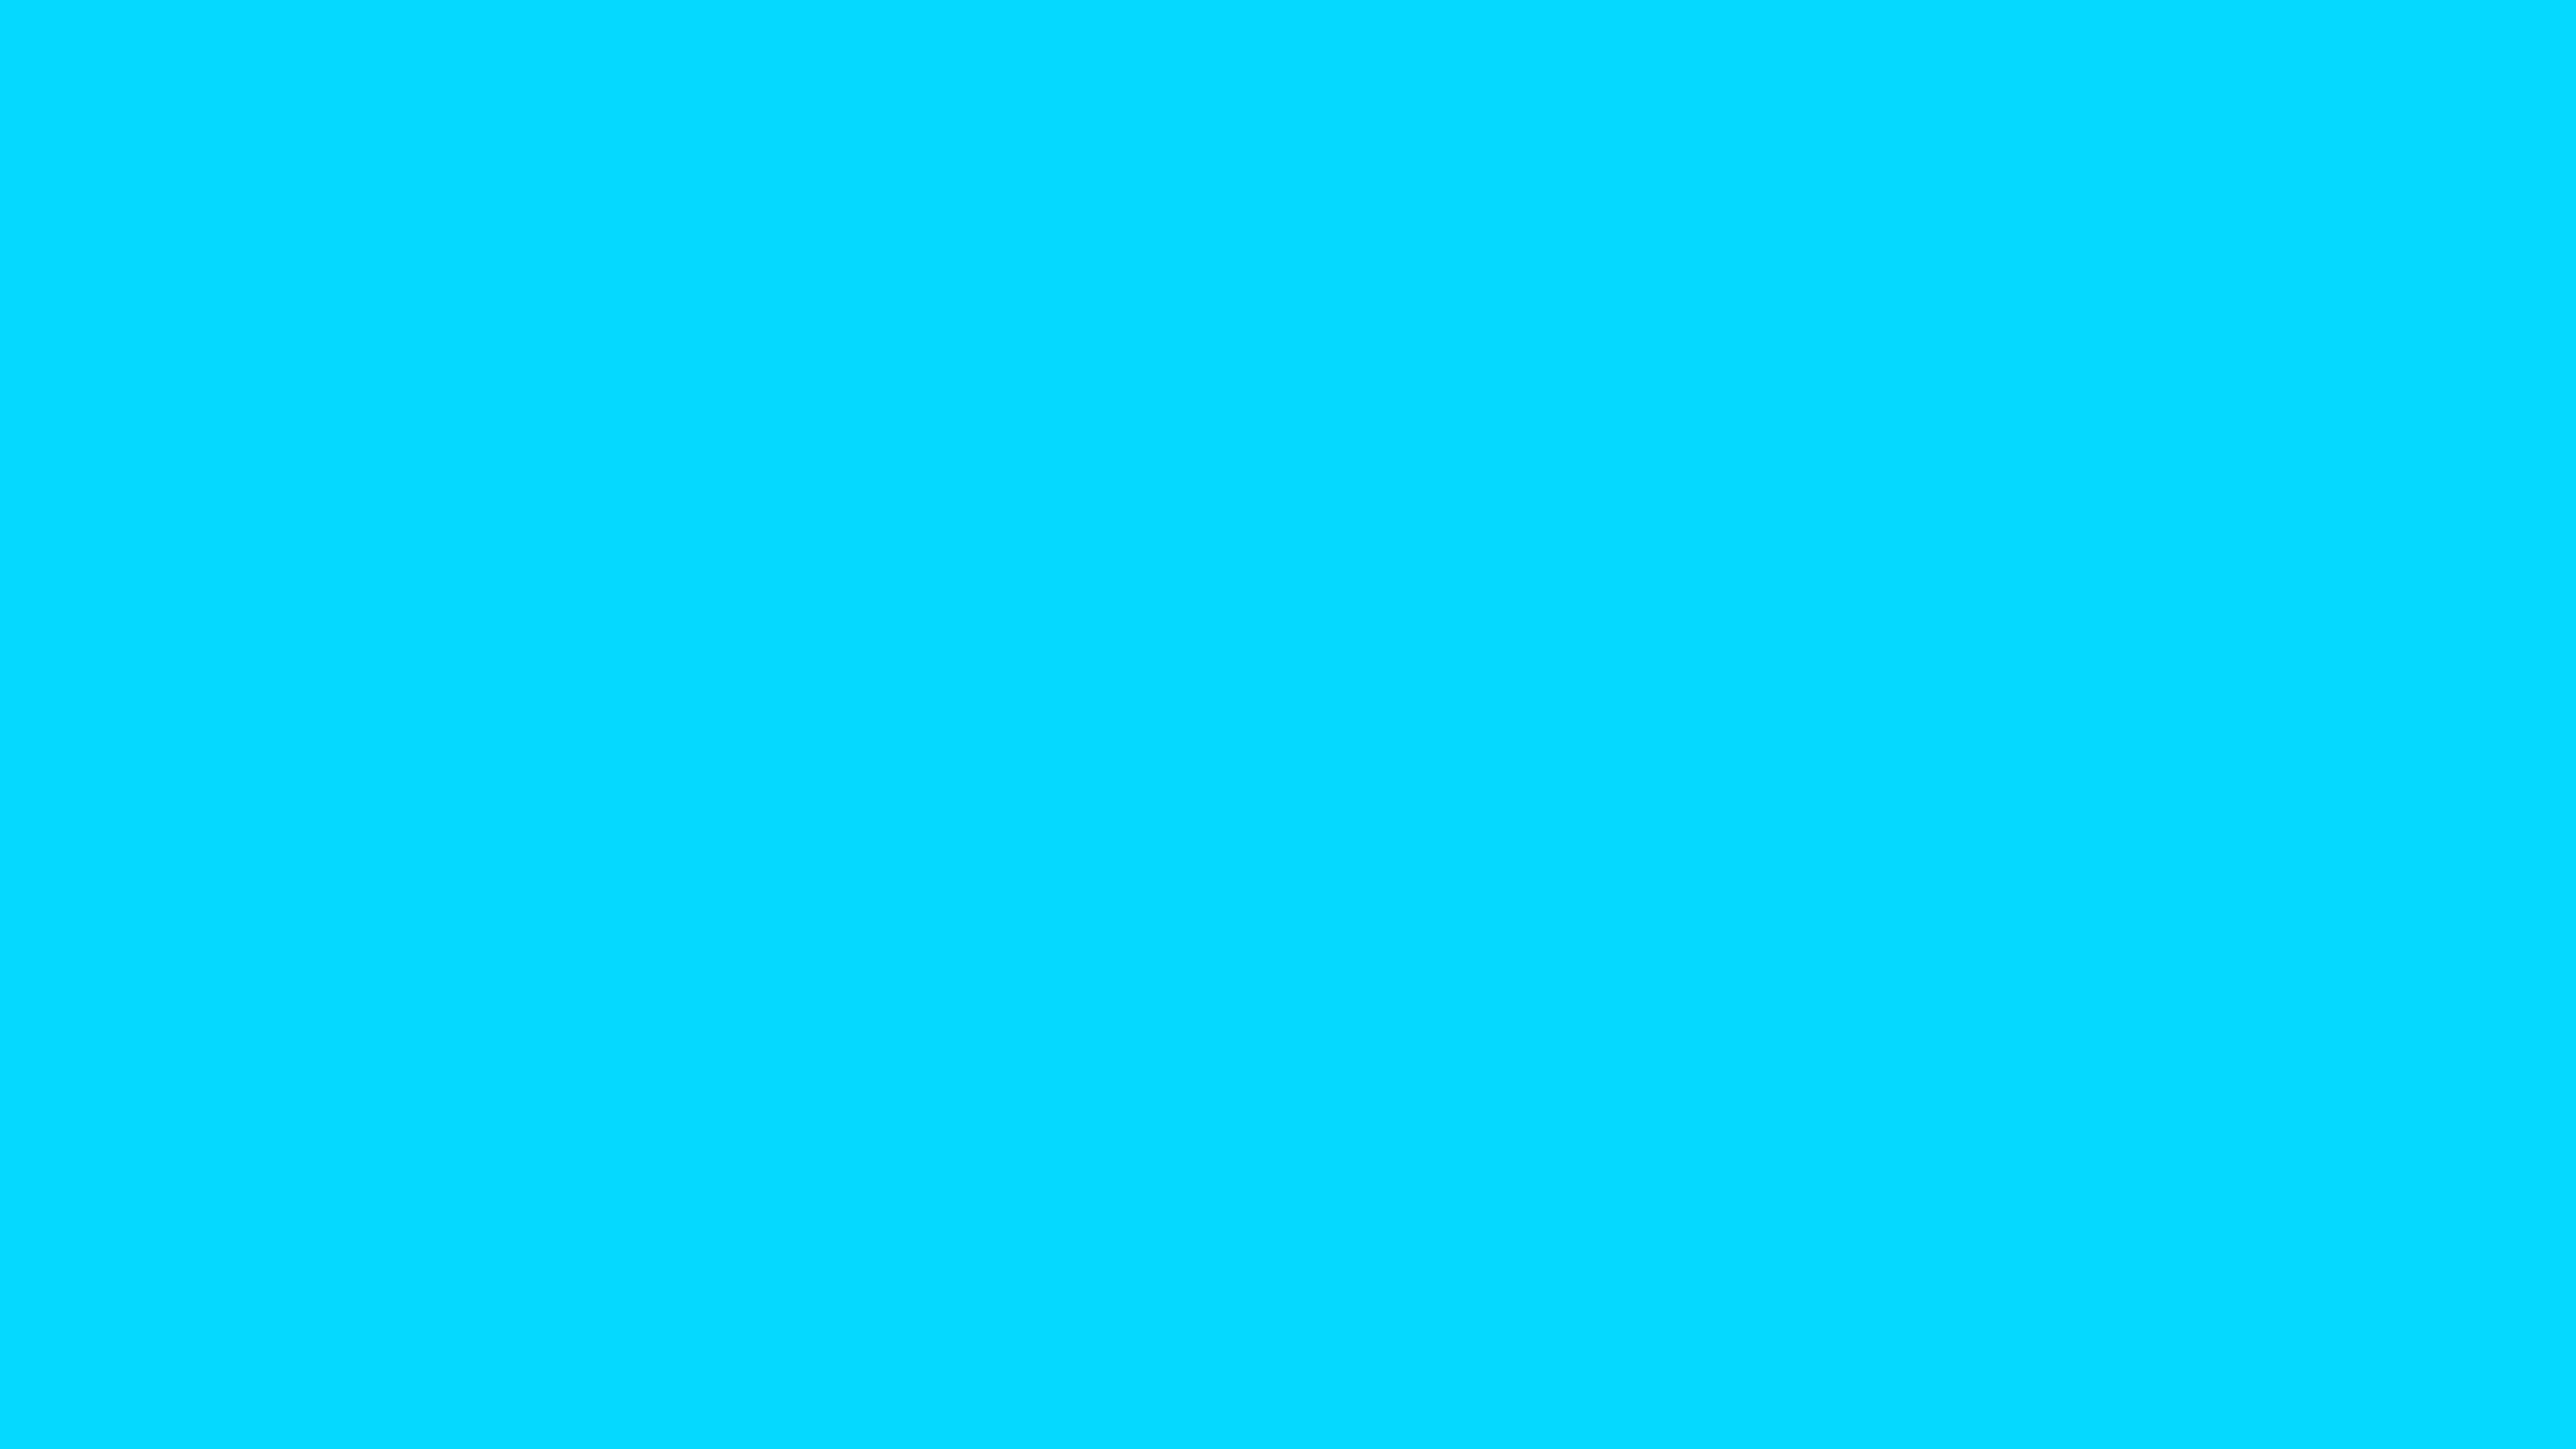 Neon Blue Solid Color Background Image | Free Image Generator